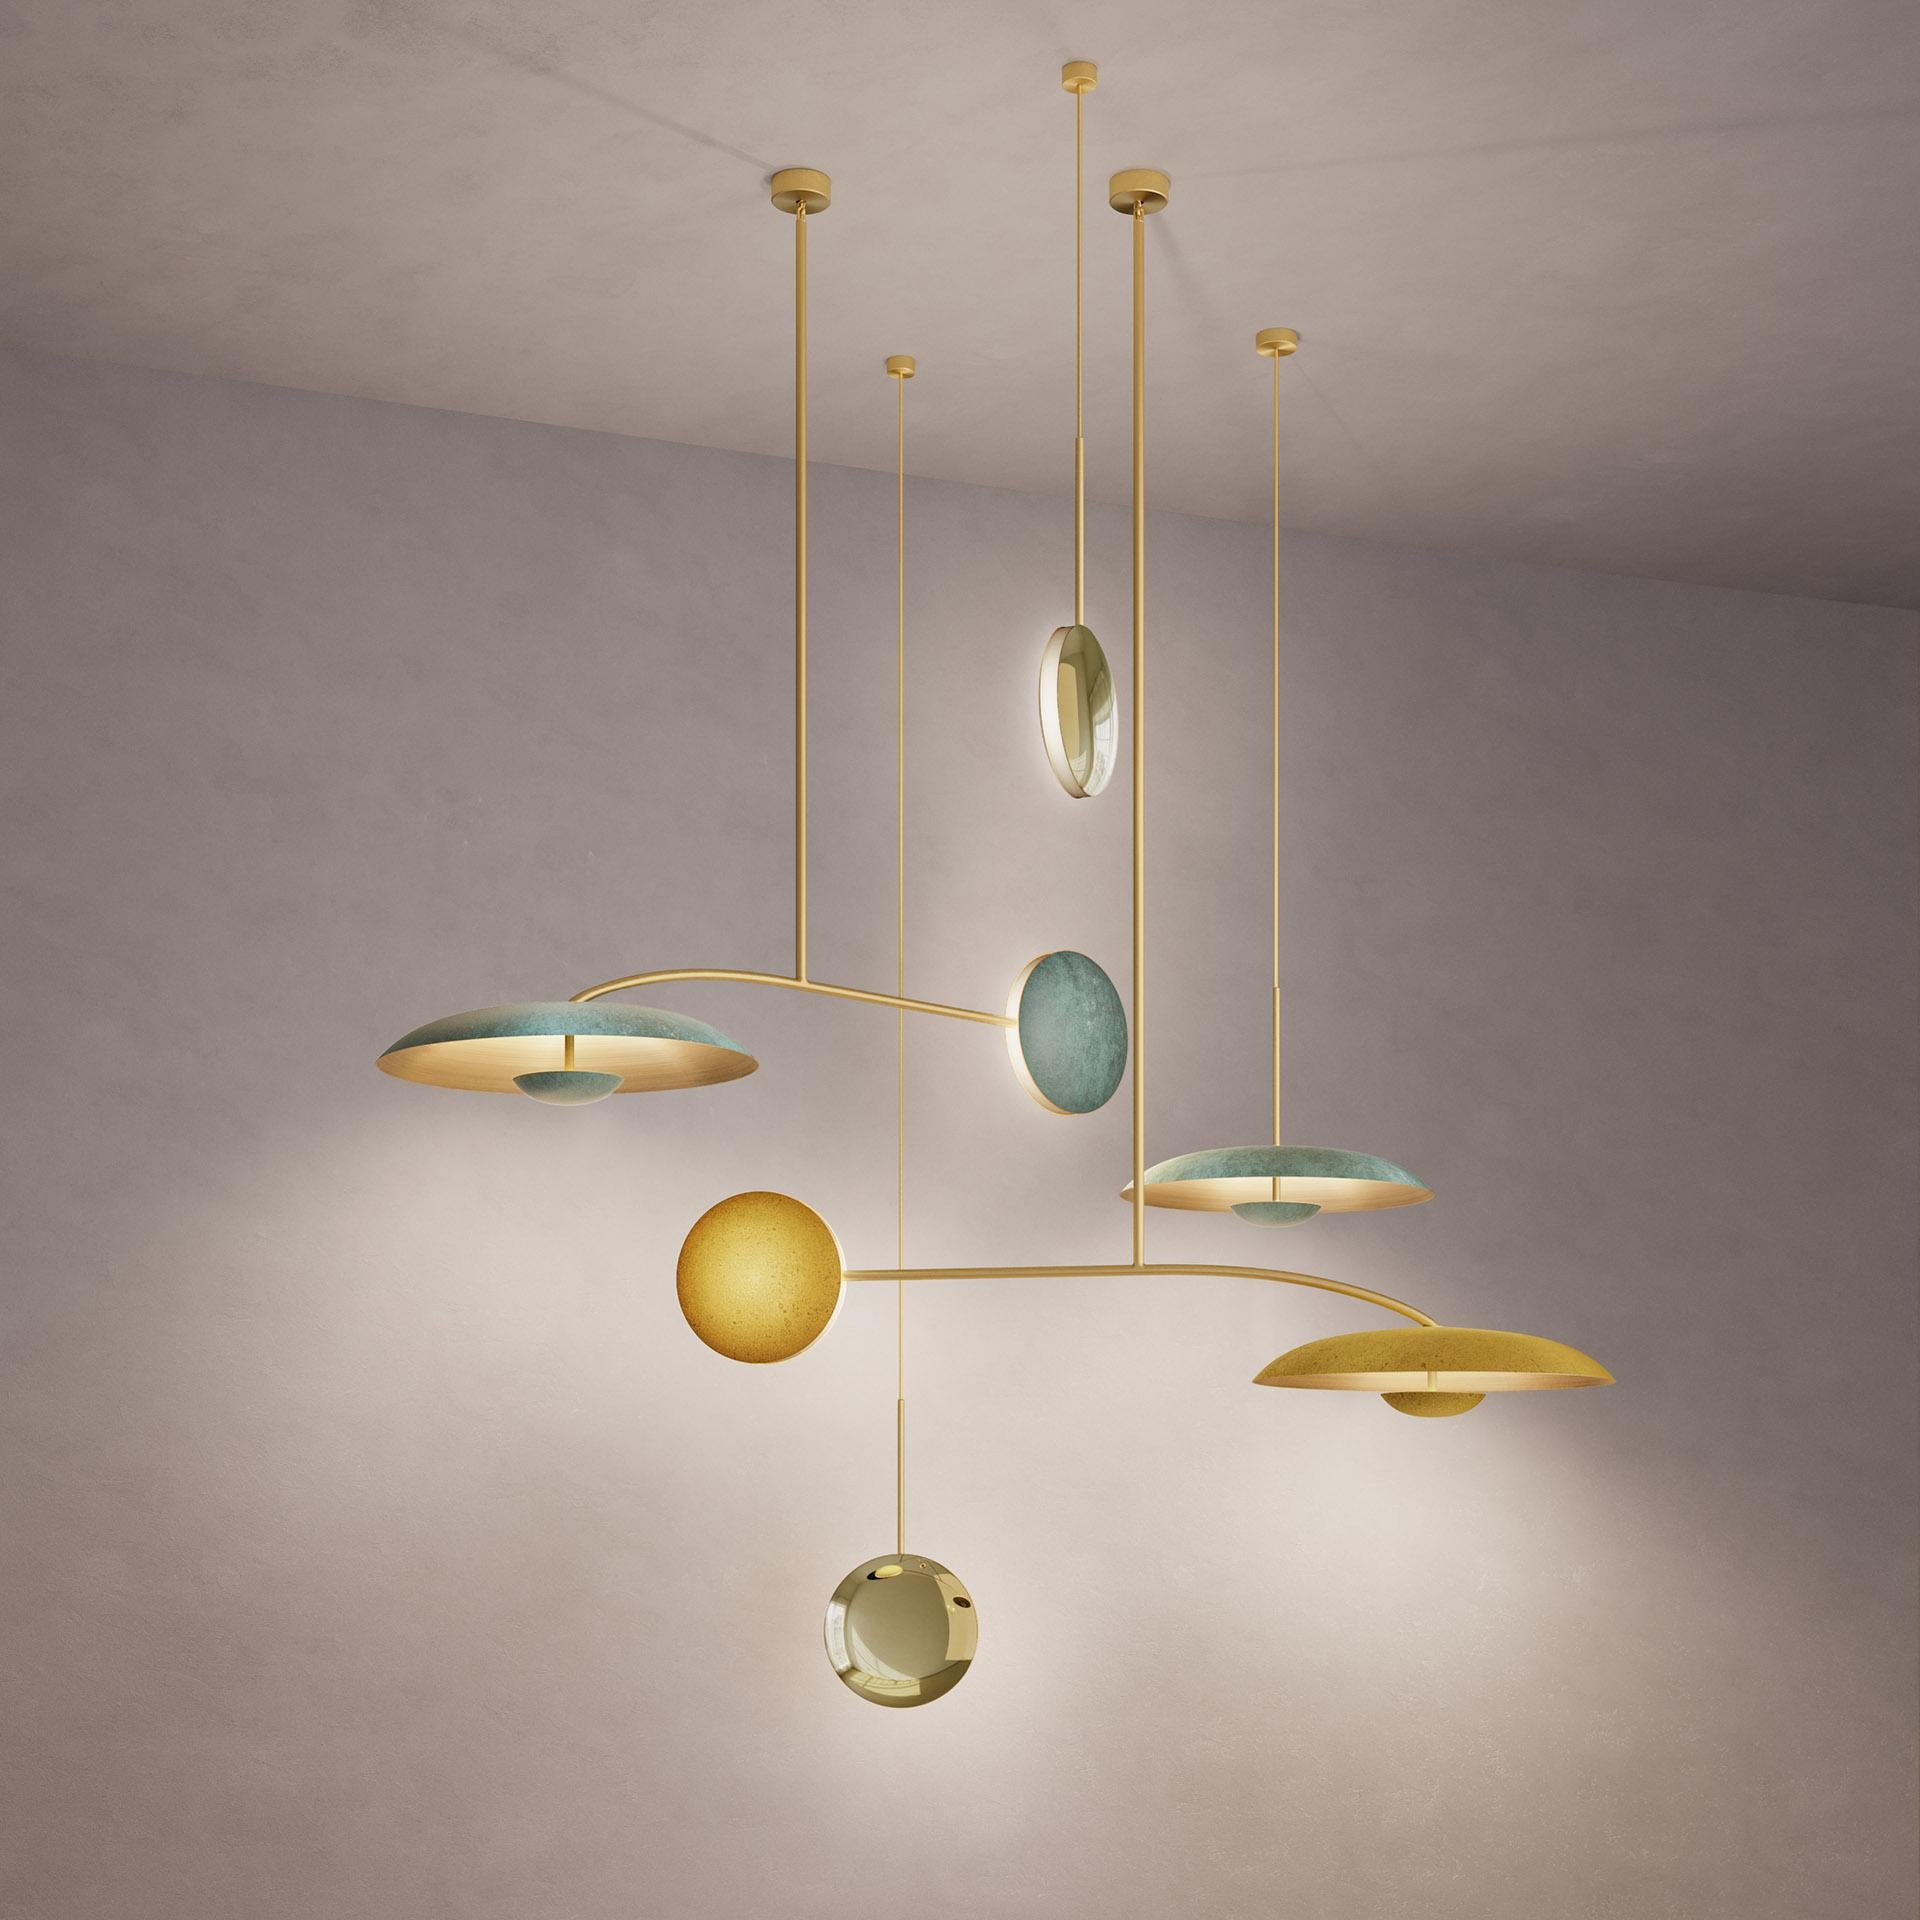 Inspired by planet-like shapes and textures, the Cosmic collection plays with both metal properties and a selection of patina finishes.
 
Finished in Atelier001’s signature bronze gradient patina Ore, the five lighting components are harmoniously